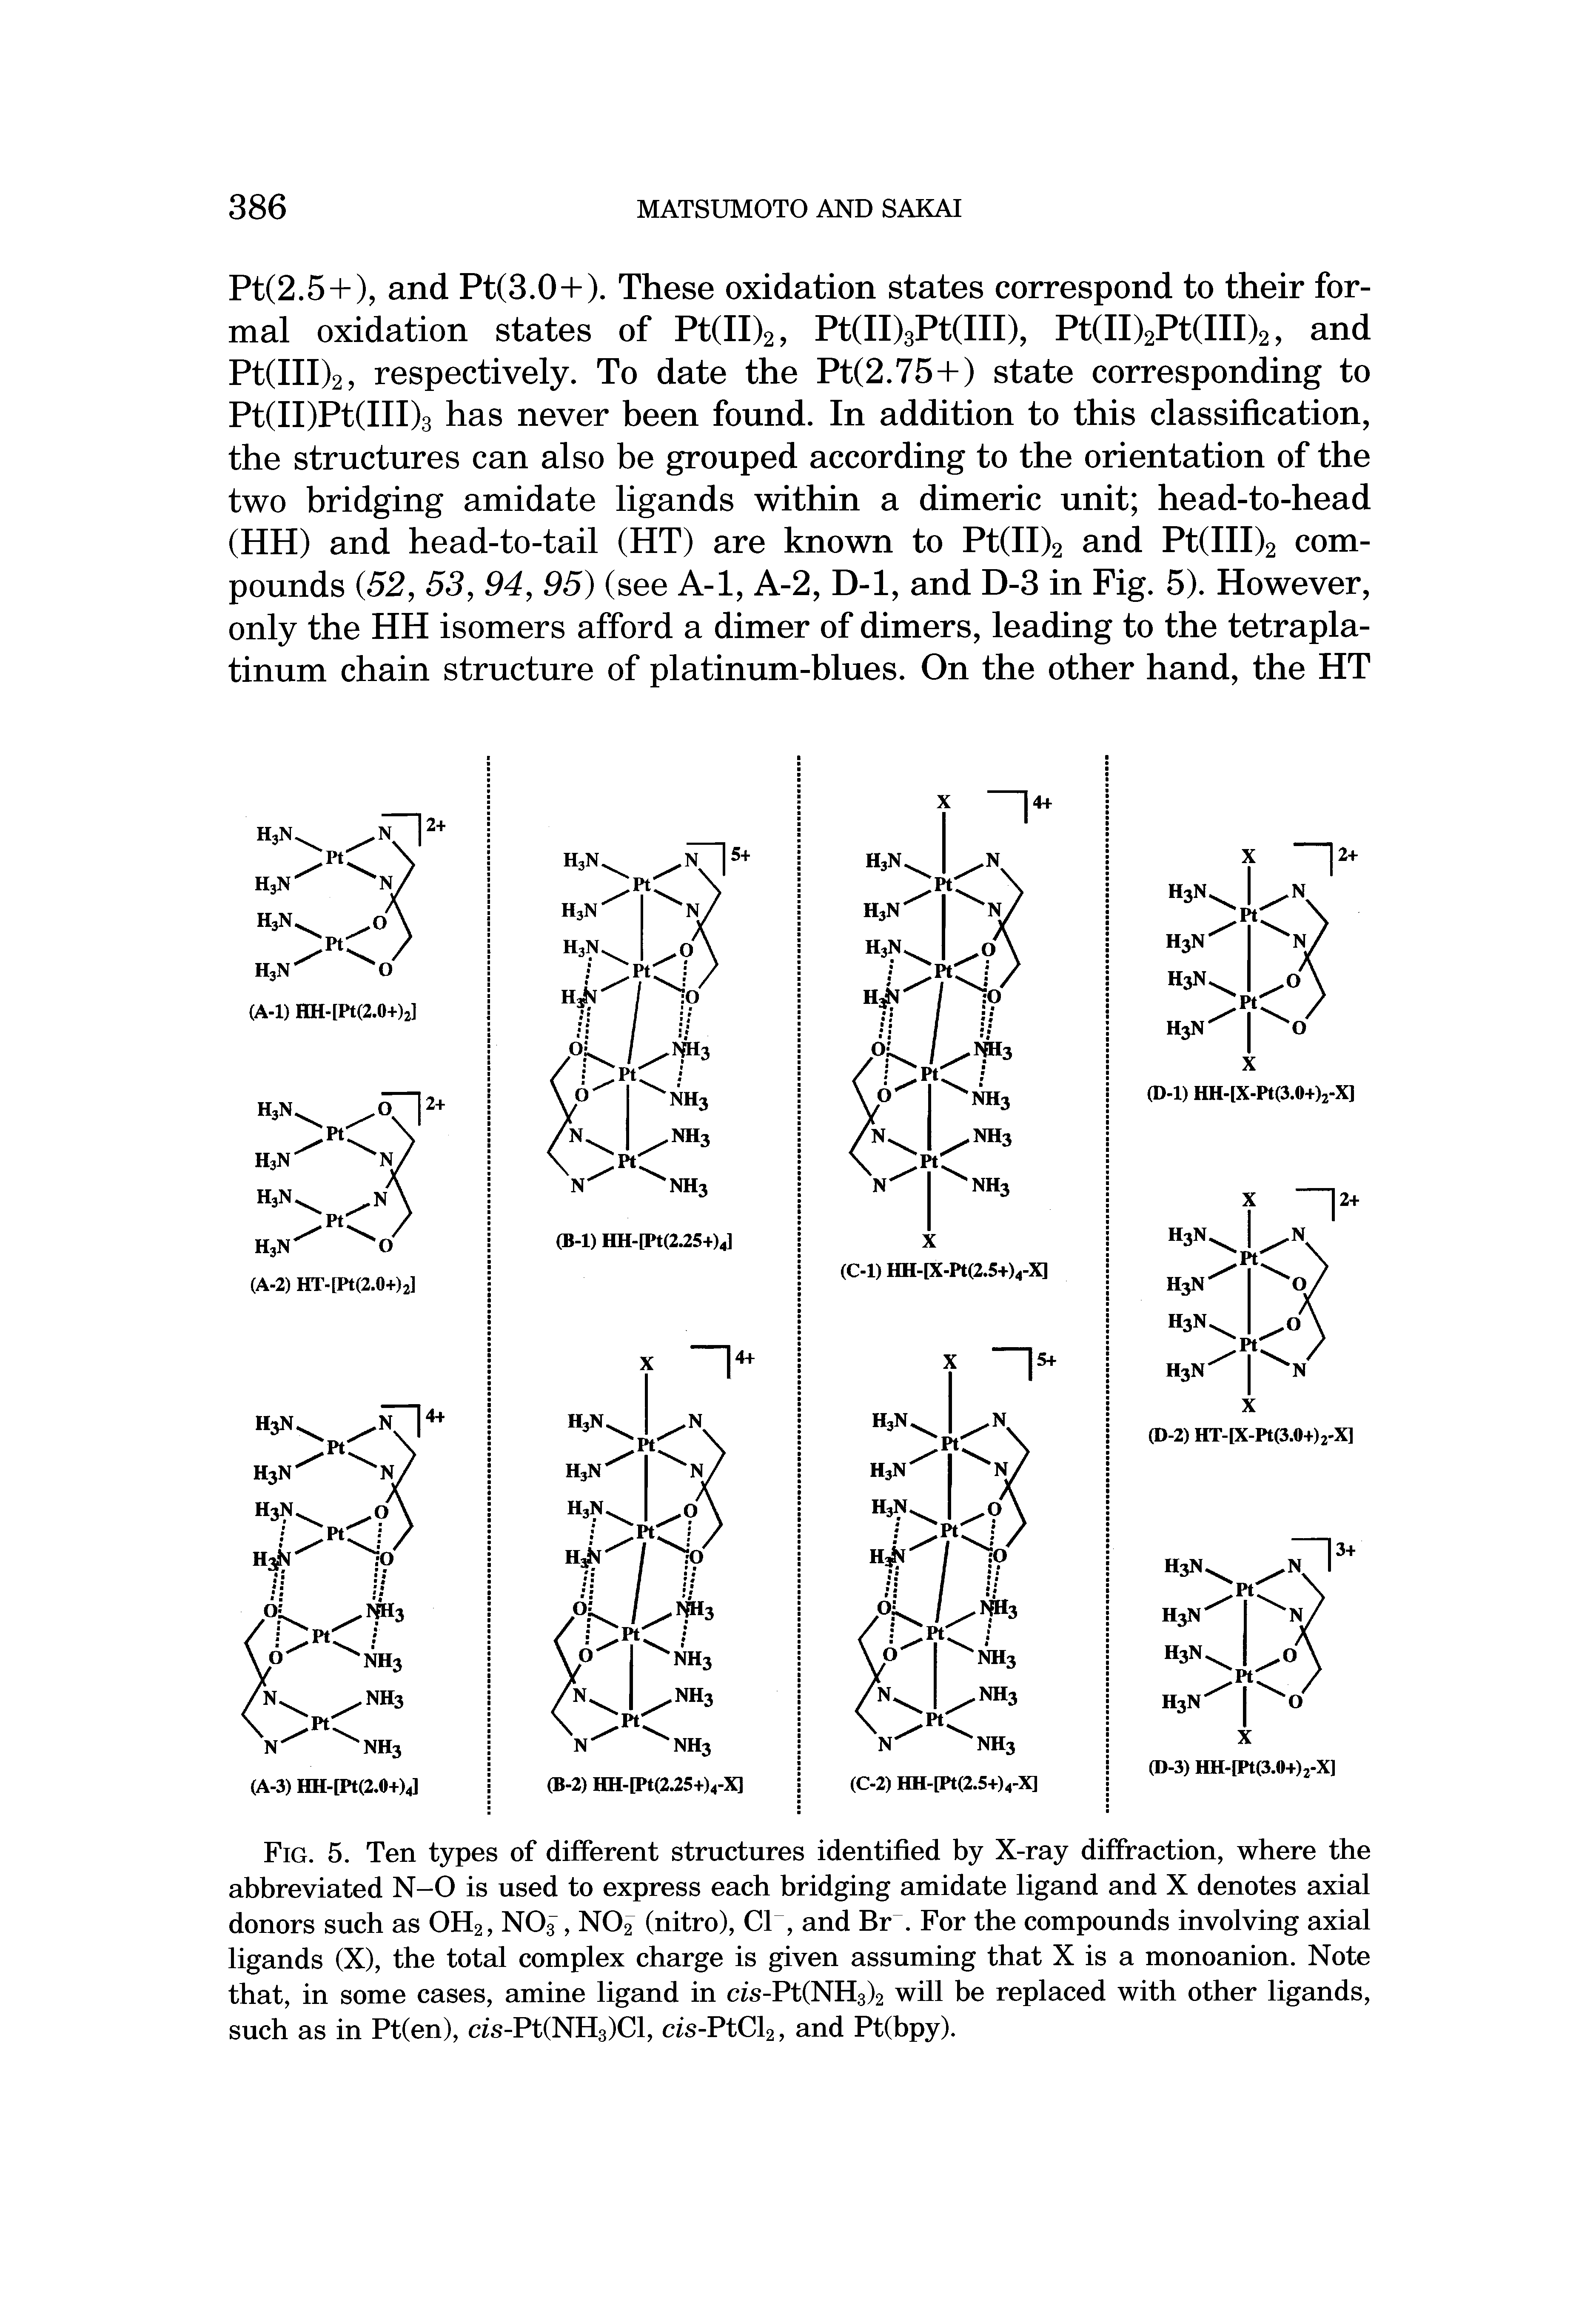 Fig. 5. Ten types of different structures identified by X-ray diffraction, where the abbreviated N-0 is used to express each bridging amidate ligand and X denotes axial donors such as OH2, N03, N02 (nitro), Cl, and Br. For the compounds involving axial ligands (X), the total complex charge is given assuming that X is a monoanion. Note that, in some cases, amine ligand in cis-Pt(NH3)2 will be replaced with other ligands, such as in Pt(en), cis-Pt(NH3)Cl, cis-PtCl2, and Pt(bpy).